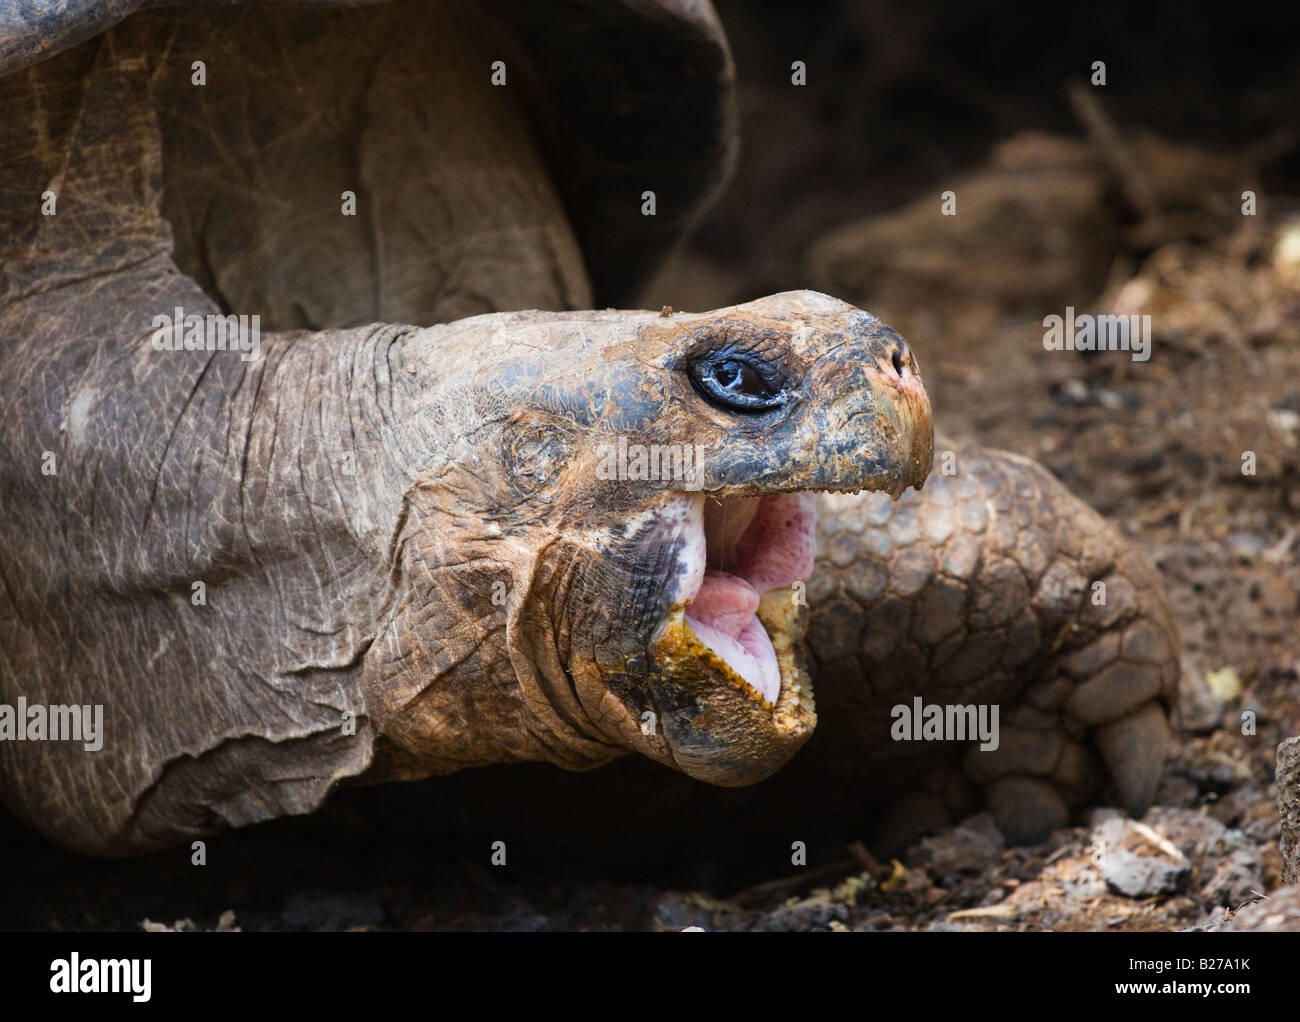 A giant tortoise yawning aggressively in the Galapagos Islands Stock Photo